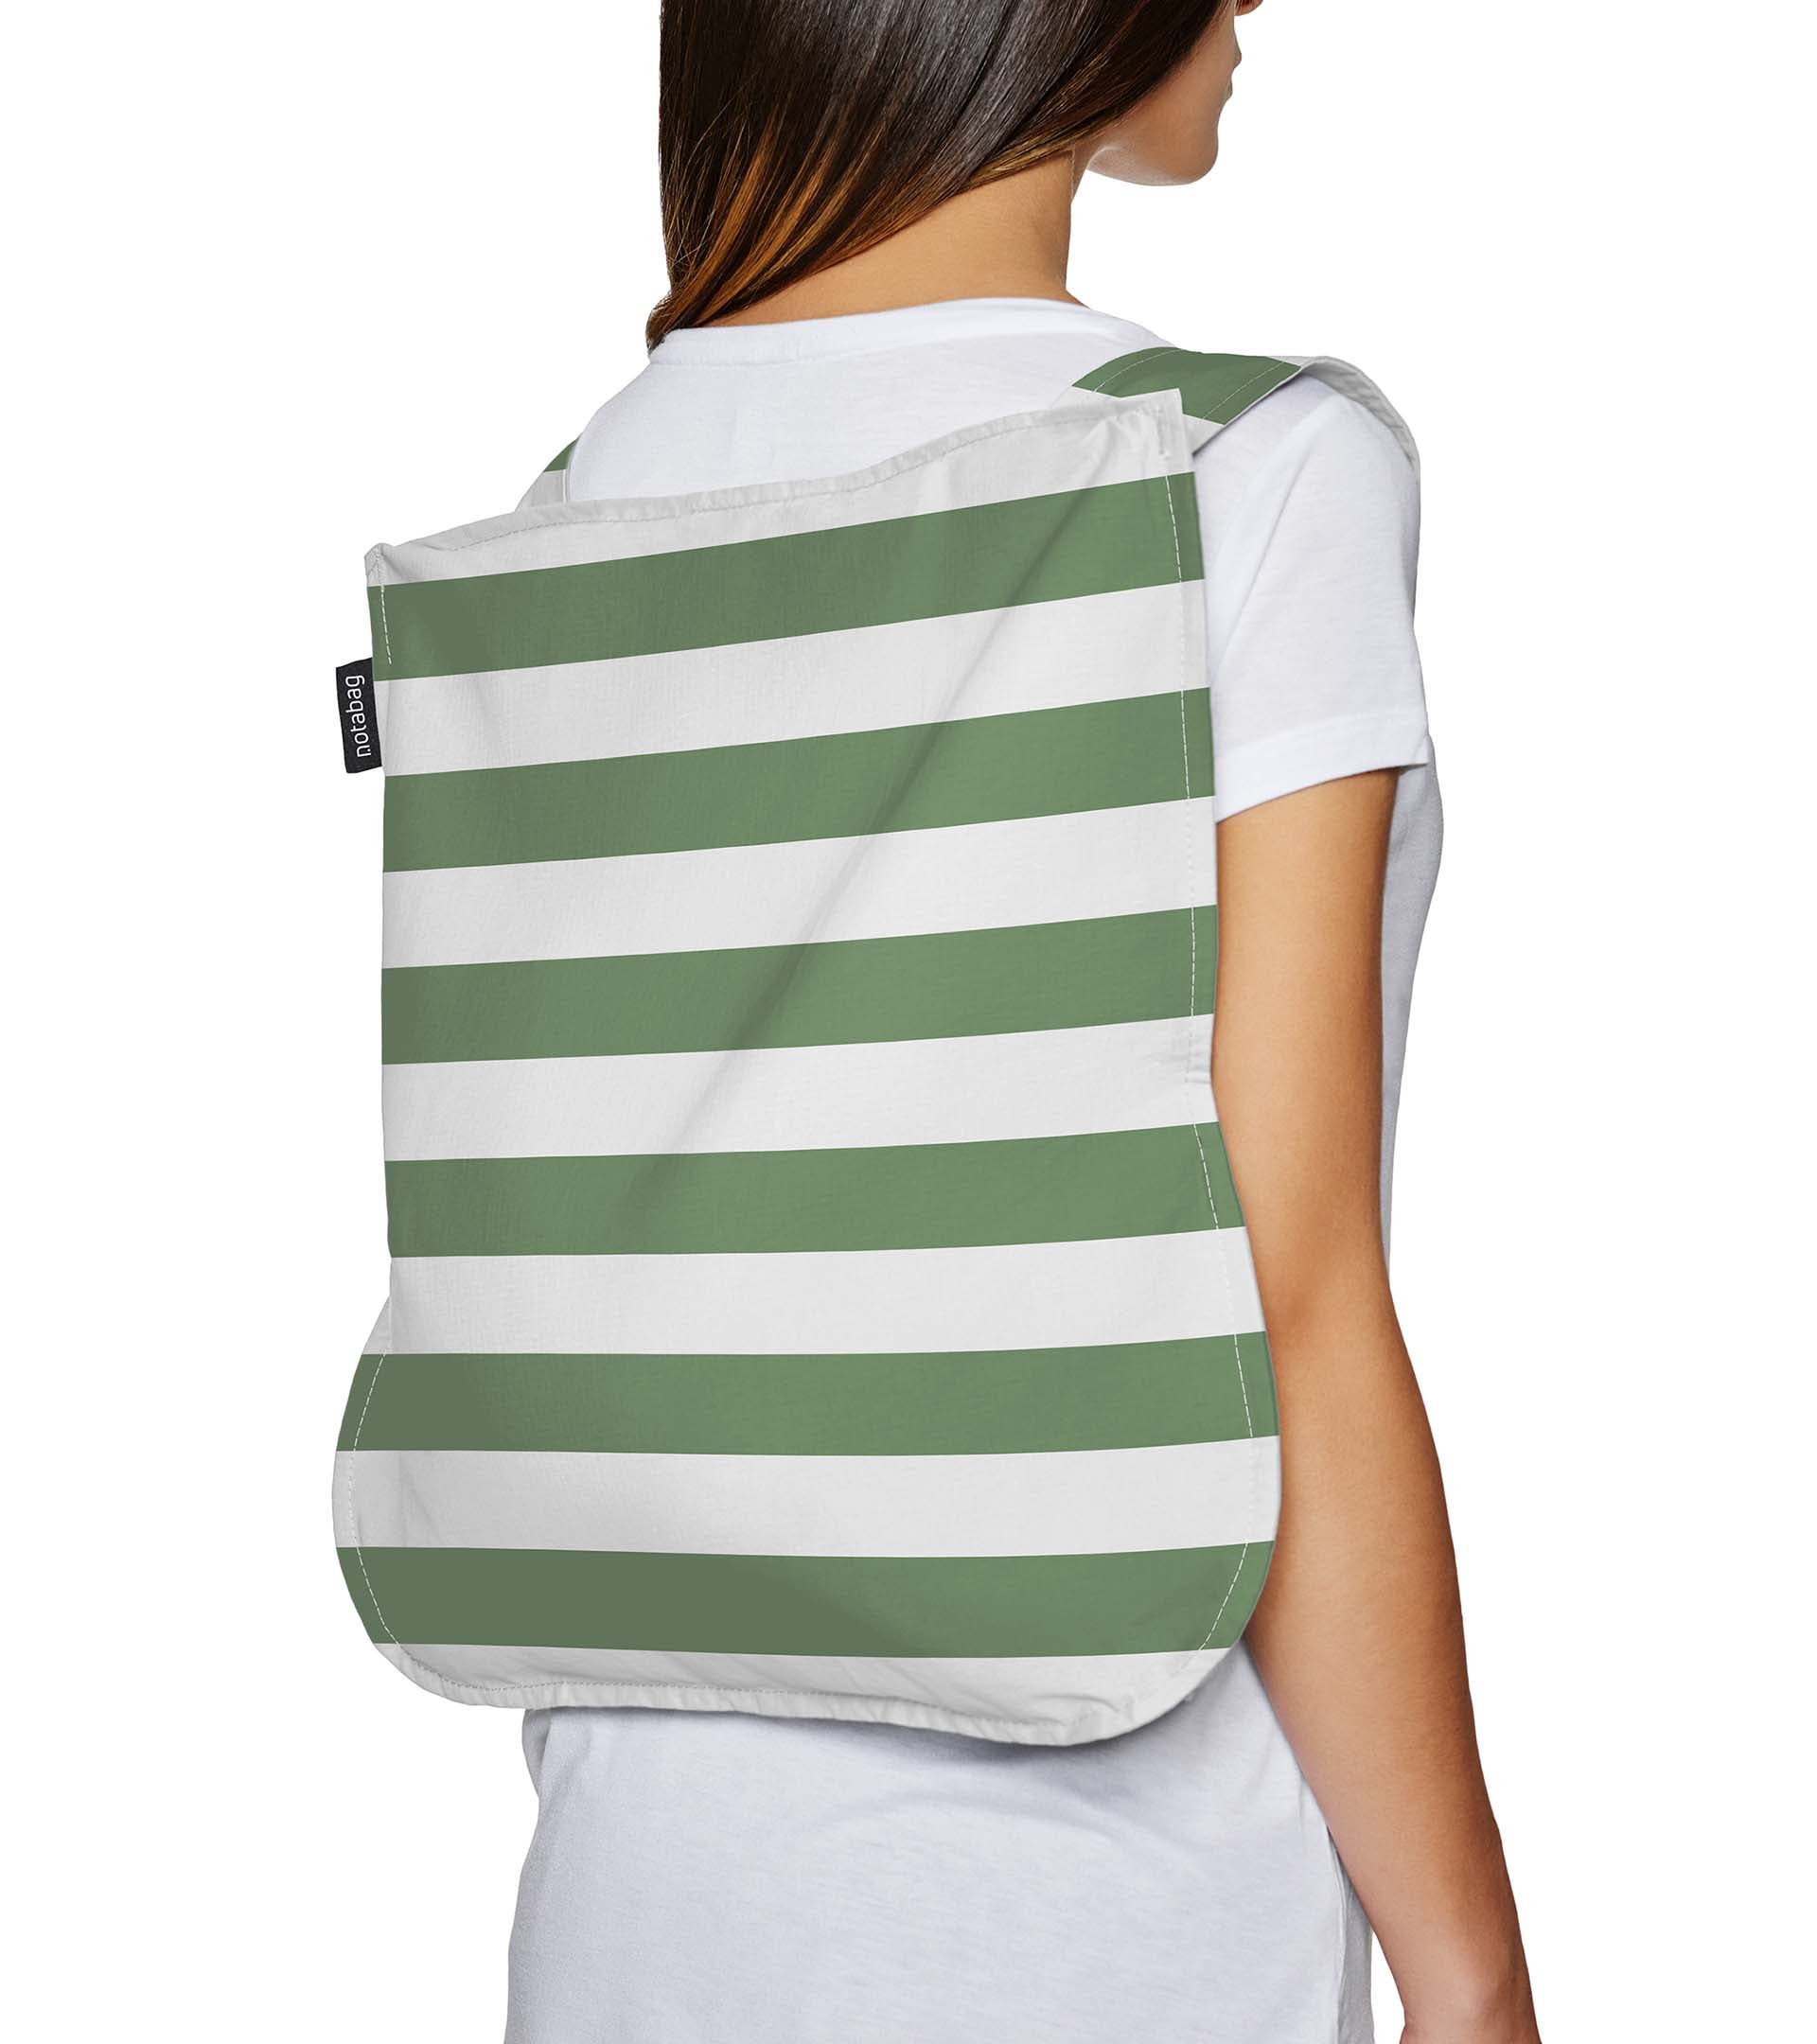 Notabag Foldable reusable backpack/tote in Olive stripe unfolded to backpack and on a models back